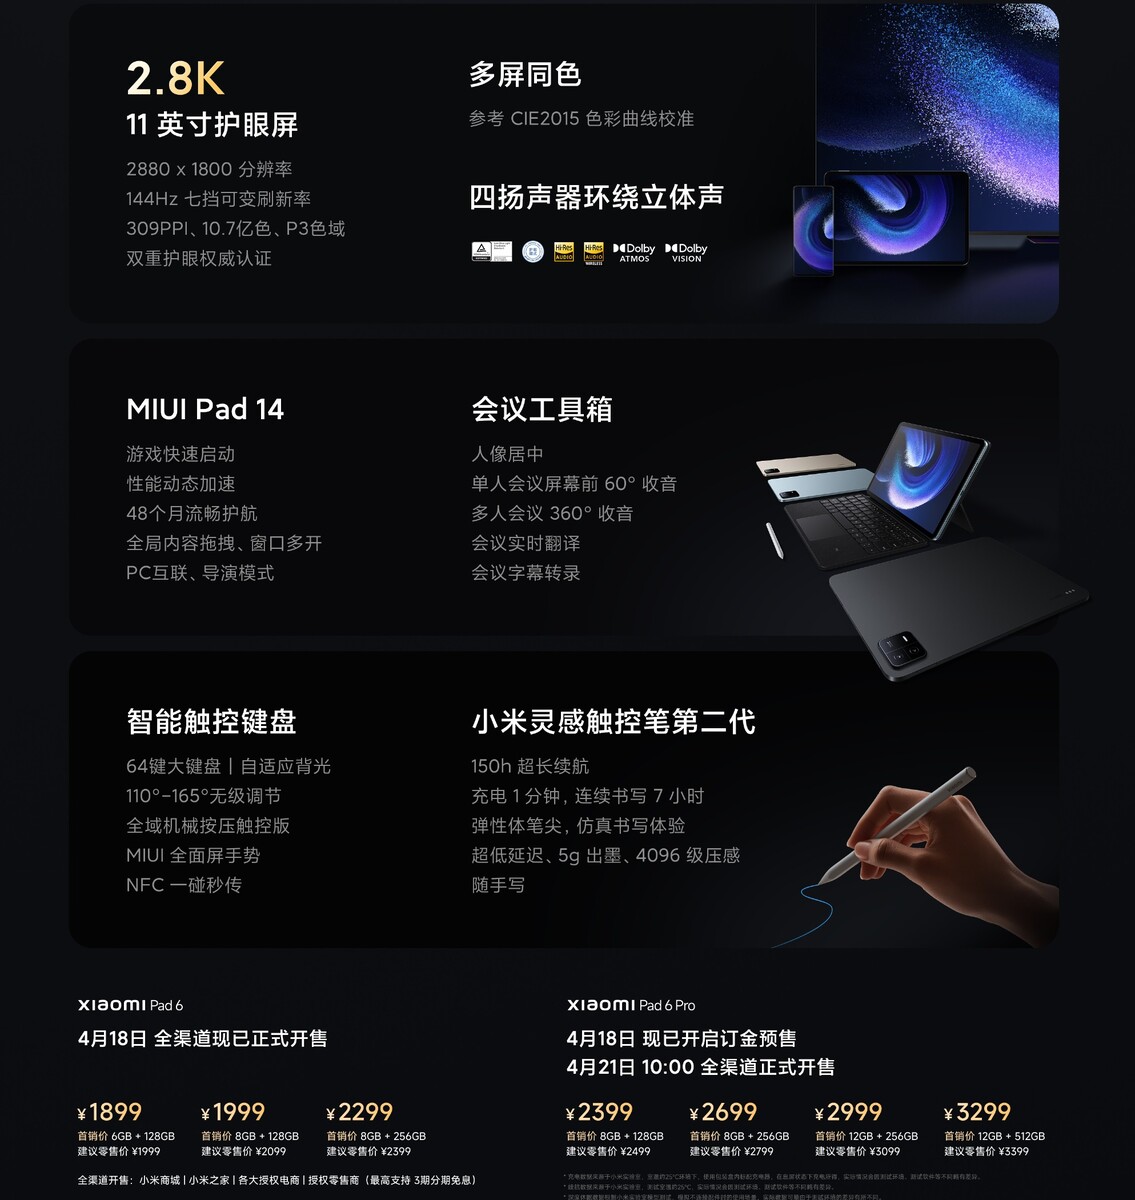 Xiaomi Pad 6 Max With Snapdragon 8+ Gen 1 SoC Launched Along Side Band 8  Pro: Details